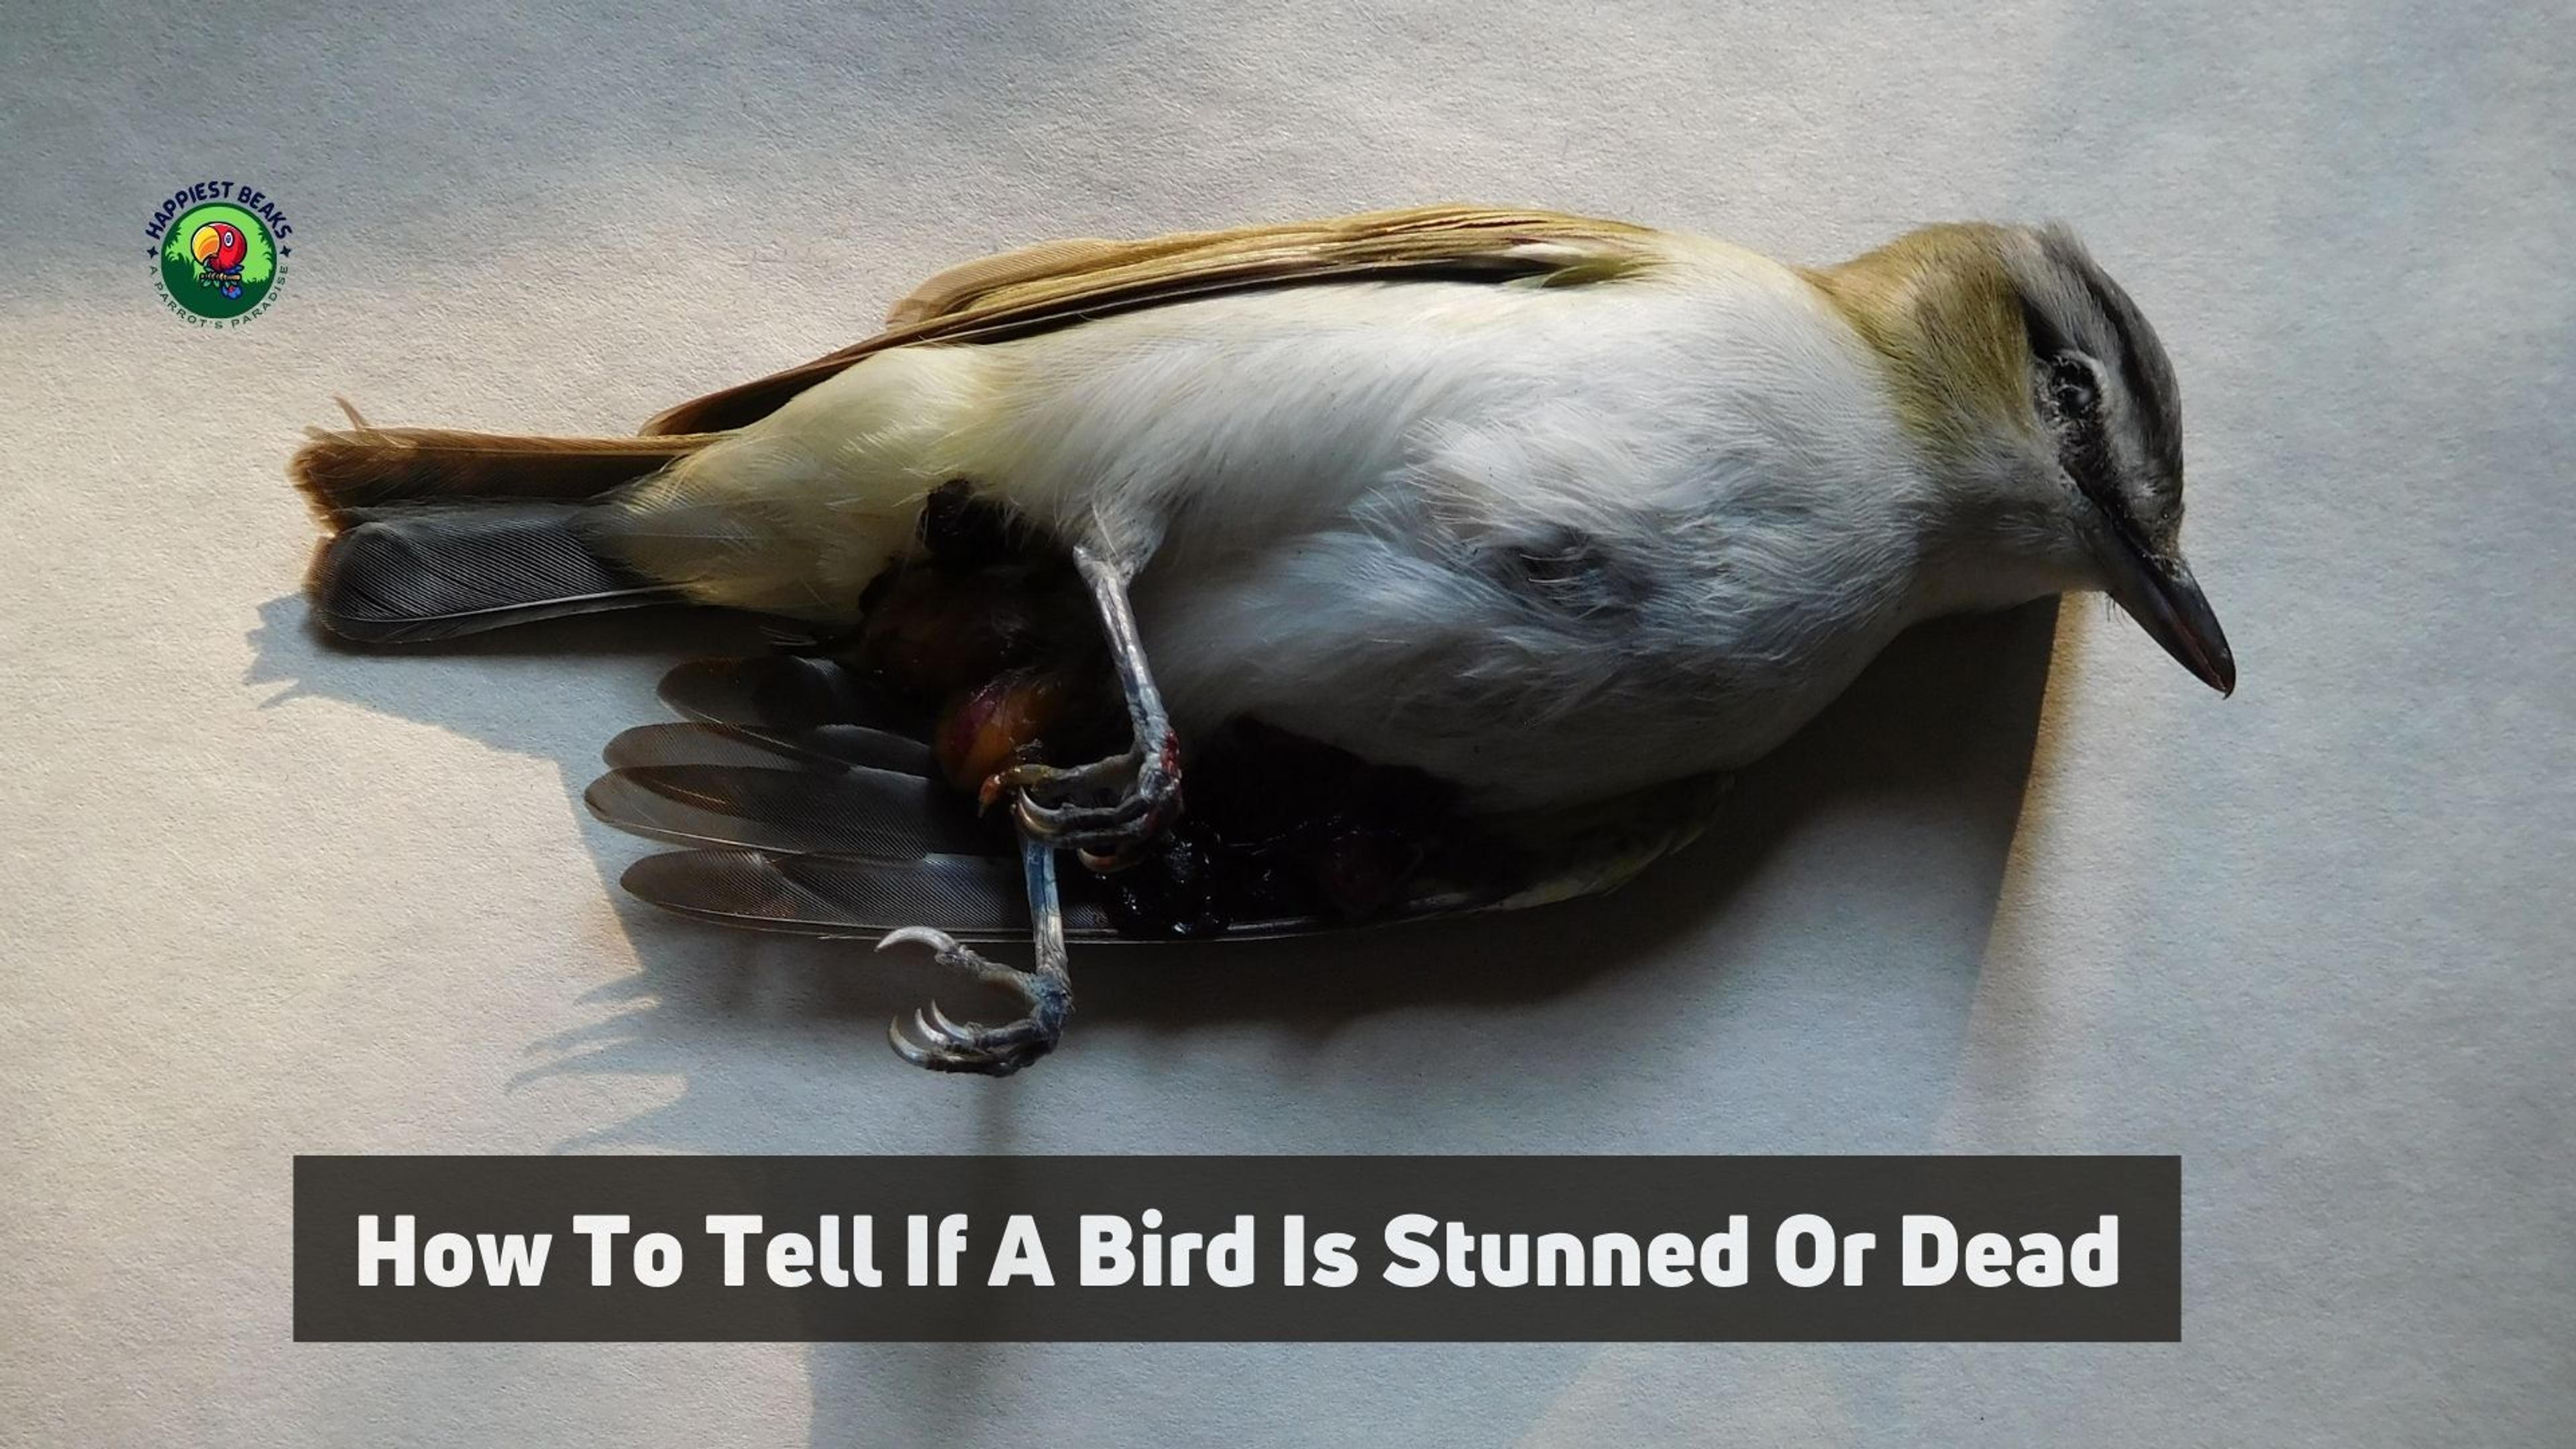 How To Tell If A Bird Is Stunned Or Dead